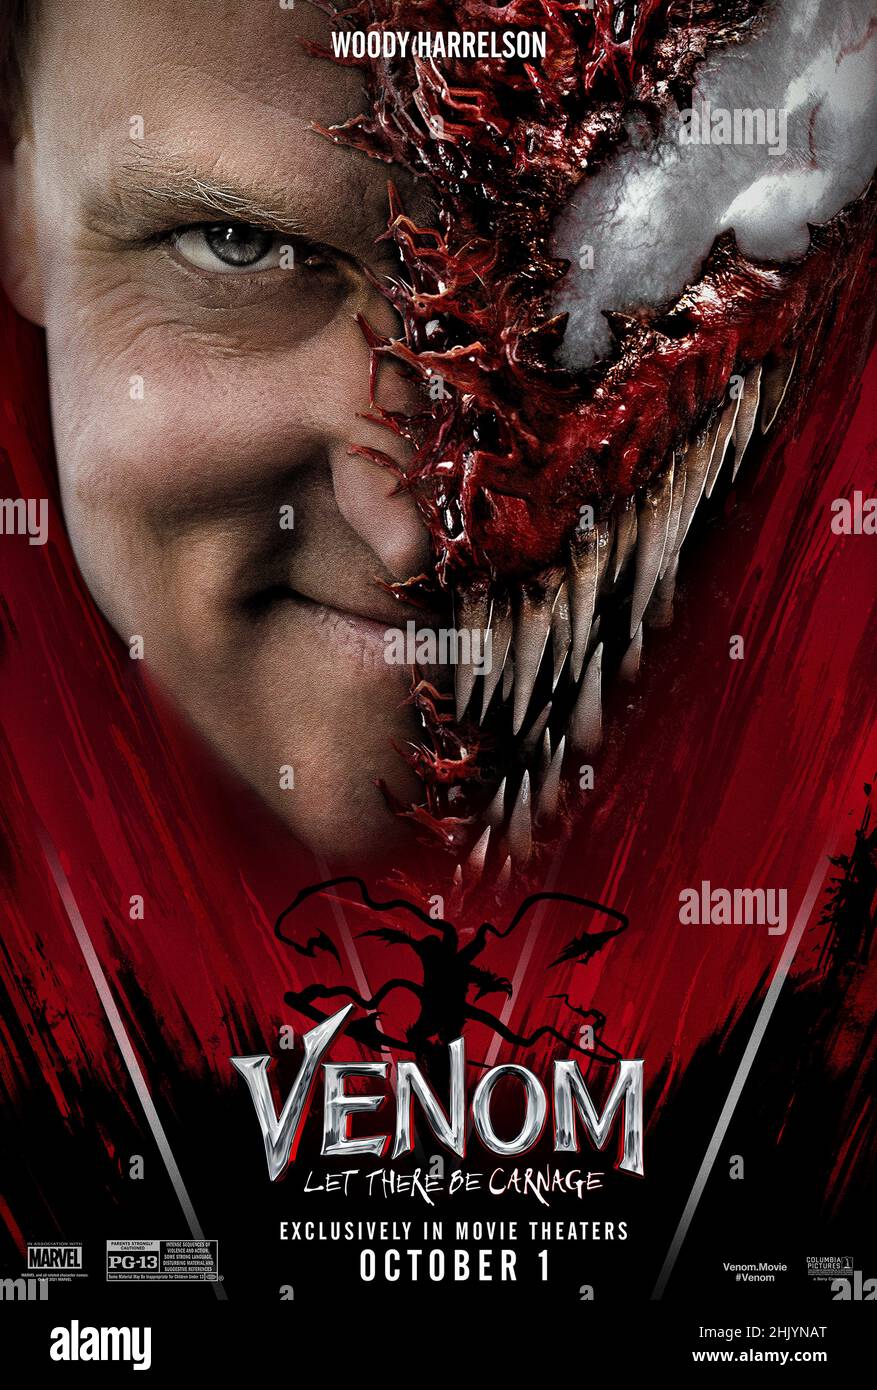 Venom: Let There Be Carnage (2021) directed by Andy Serkis and starring Woody Harrelson, Tom Hardy and Michelle Williams. Venom returns to face the villain Carnage in this eagerly awaited sequel. Stock Photo